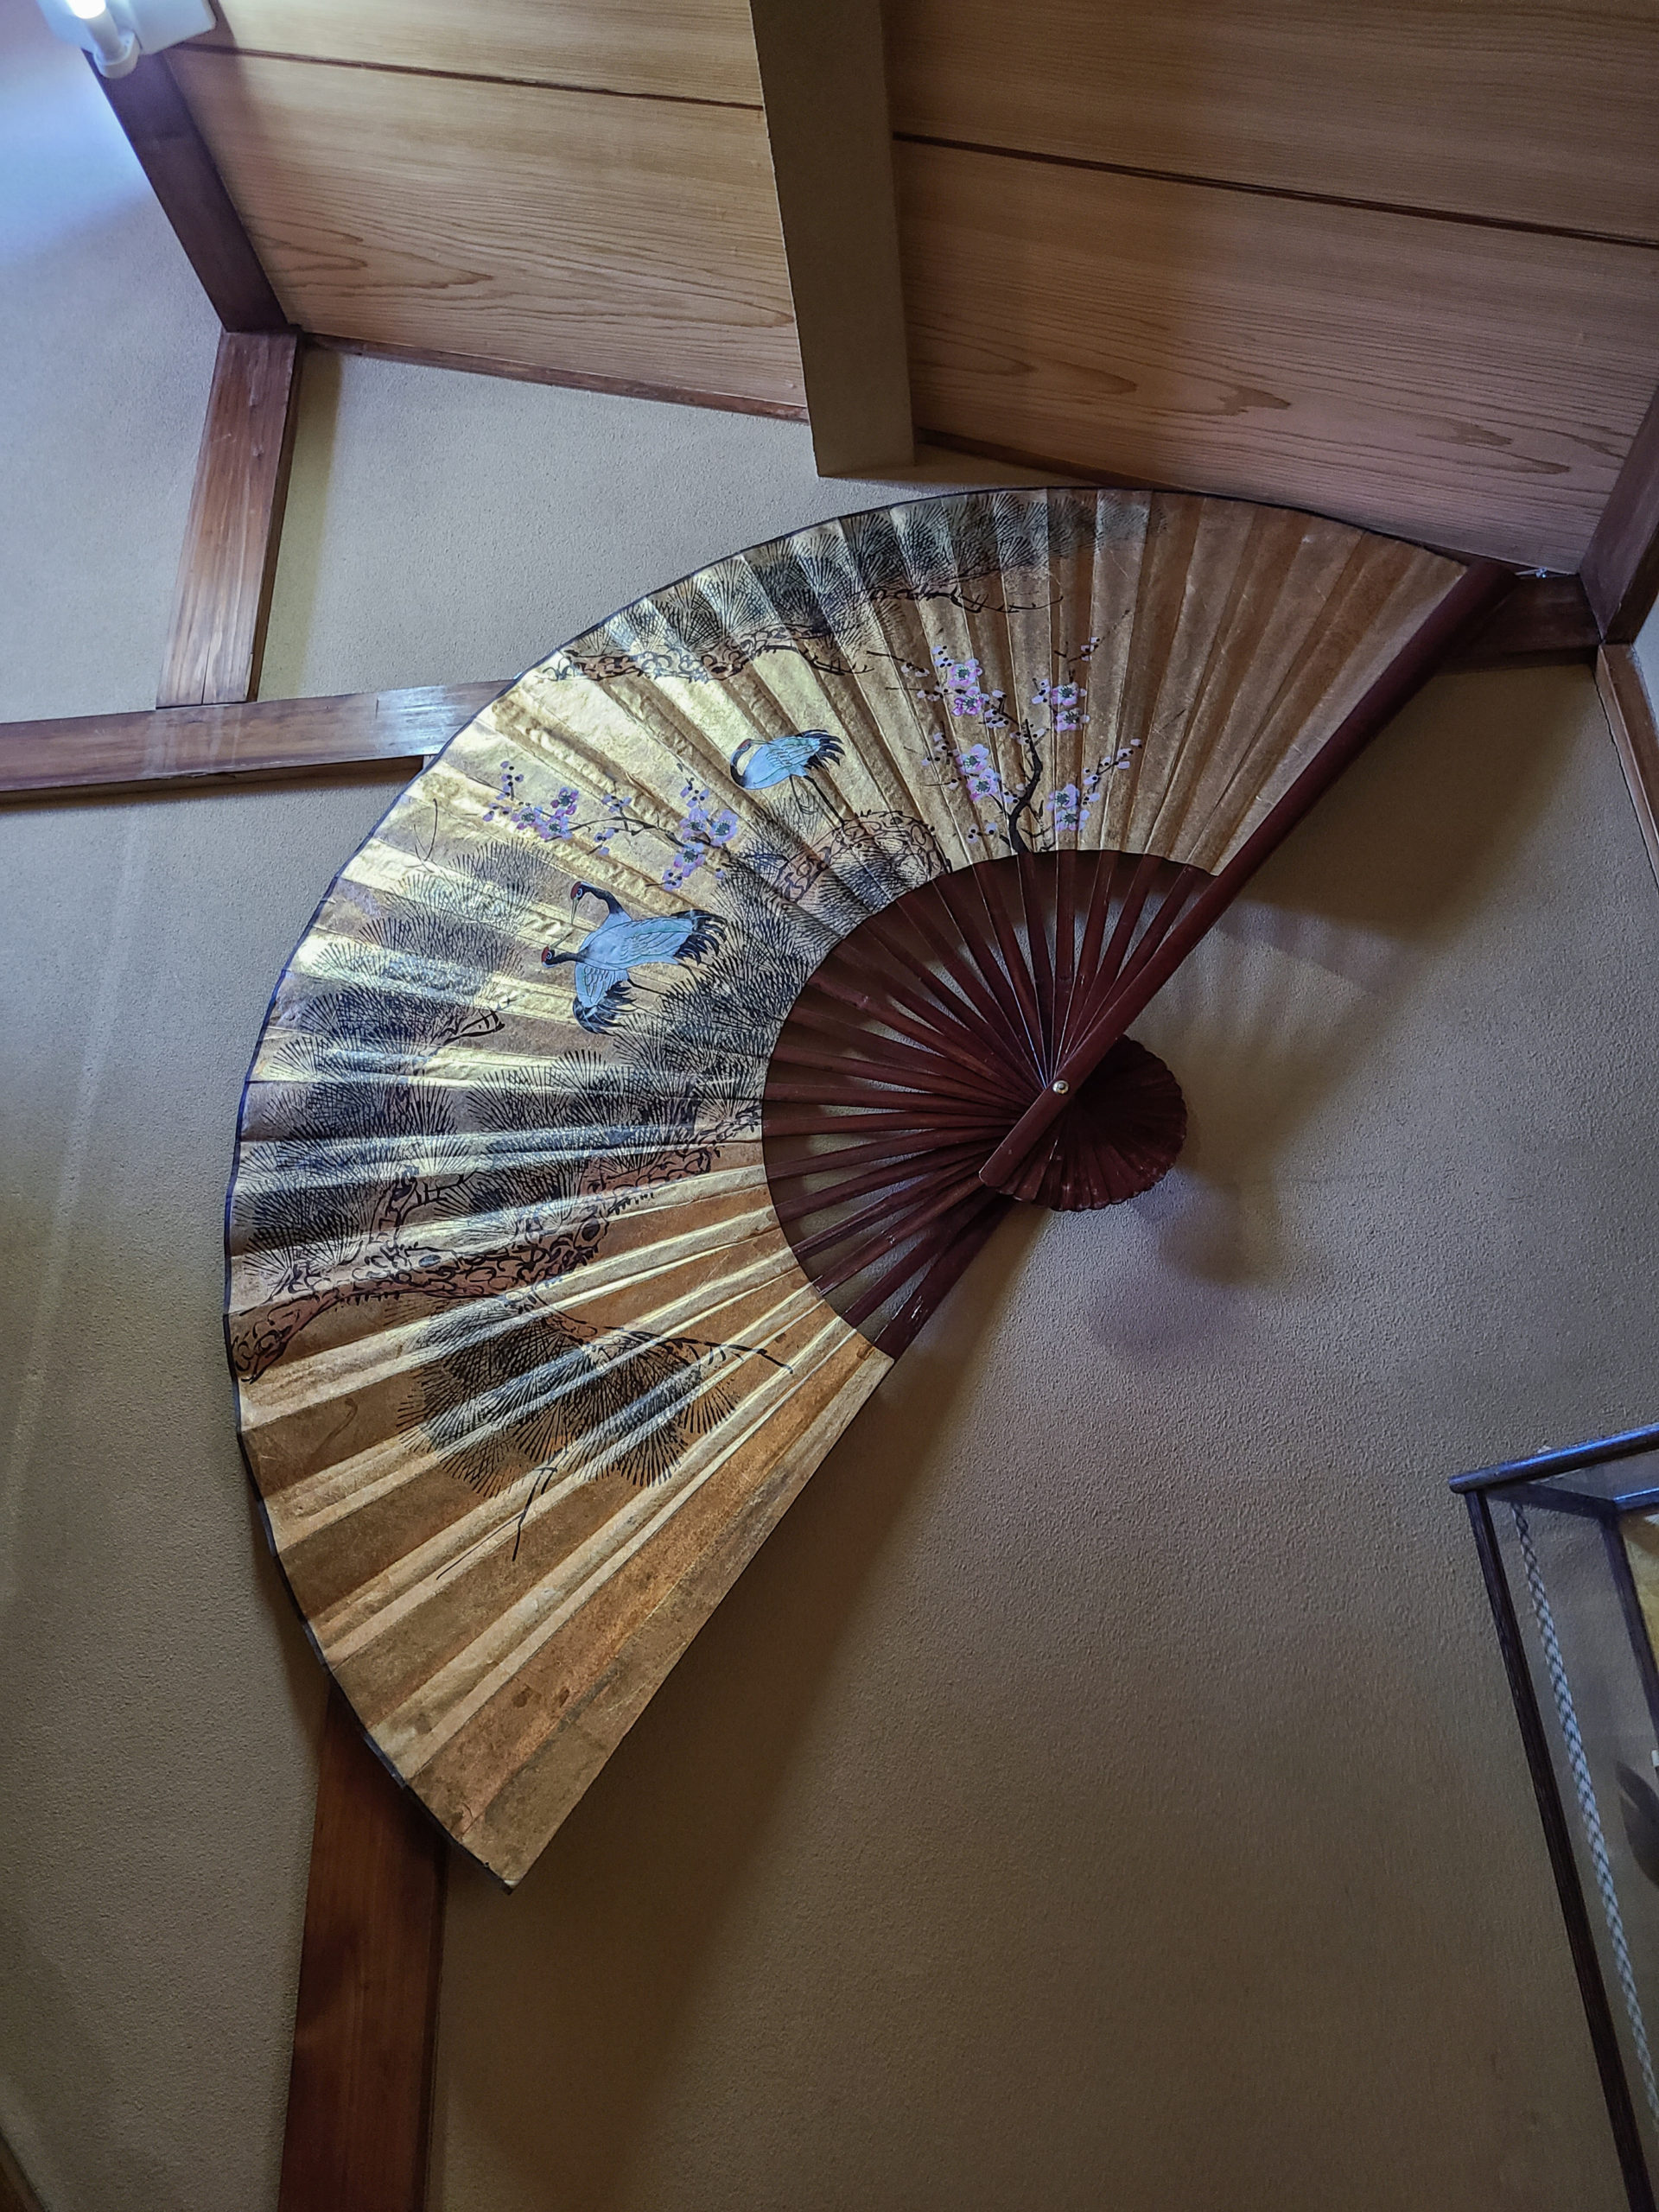 A large fan hangs in the staircase, and small antiques decorate the hall